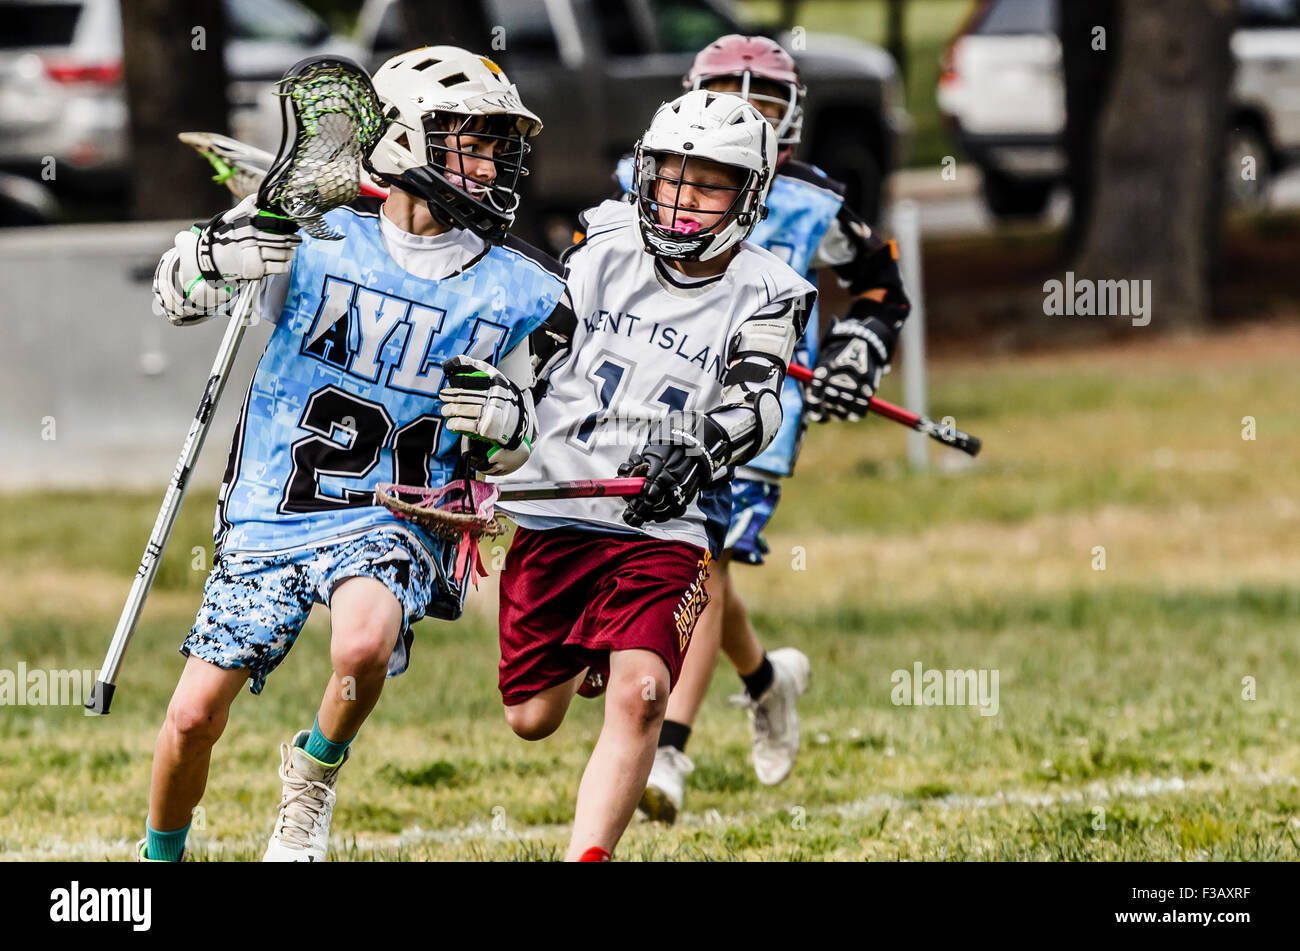 Junior lacrosse players vying for the ball Stock Photo